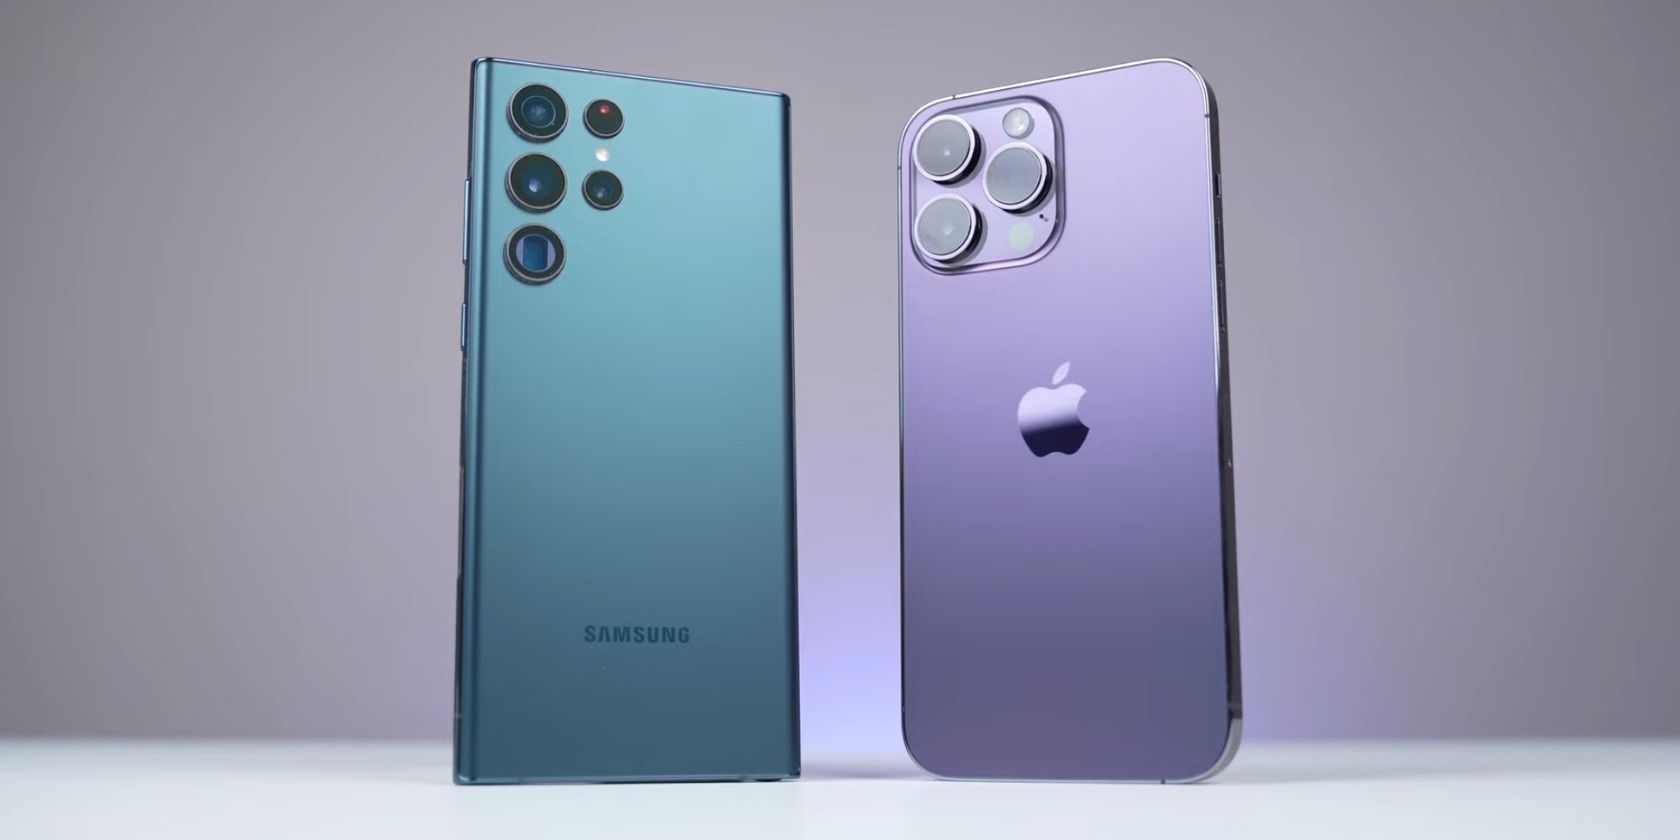 similarities and differences between iphone and samsung